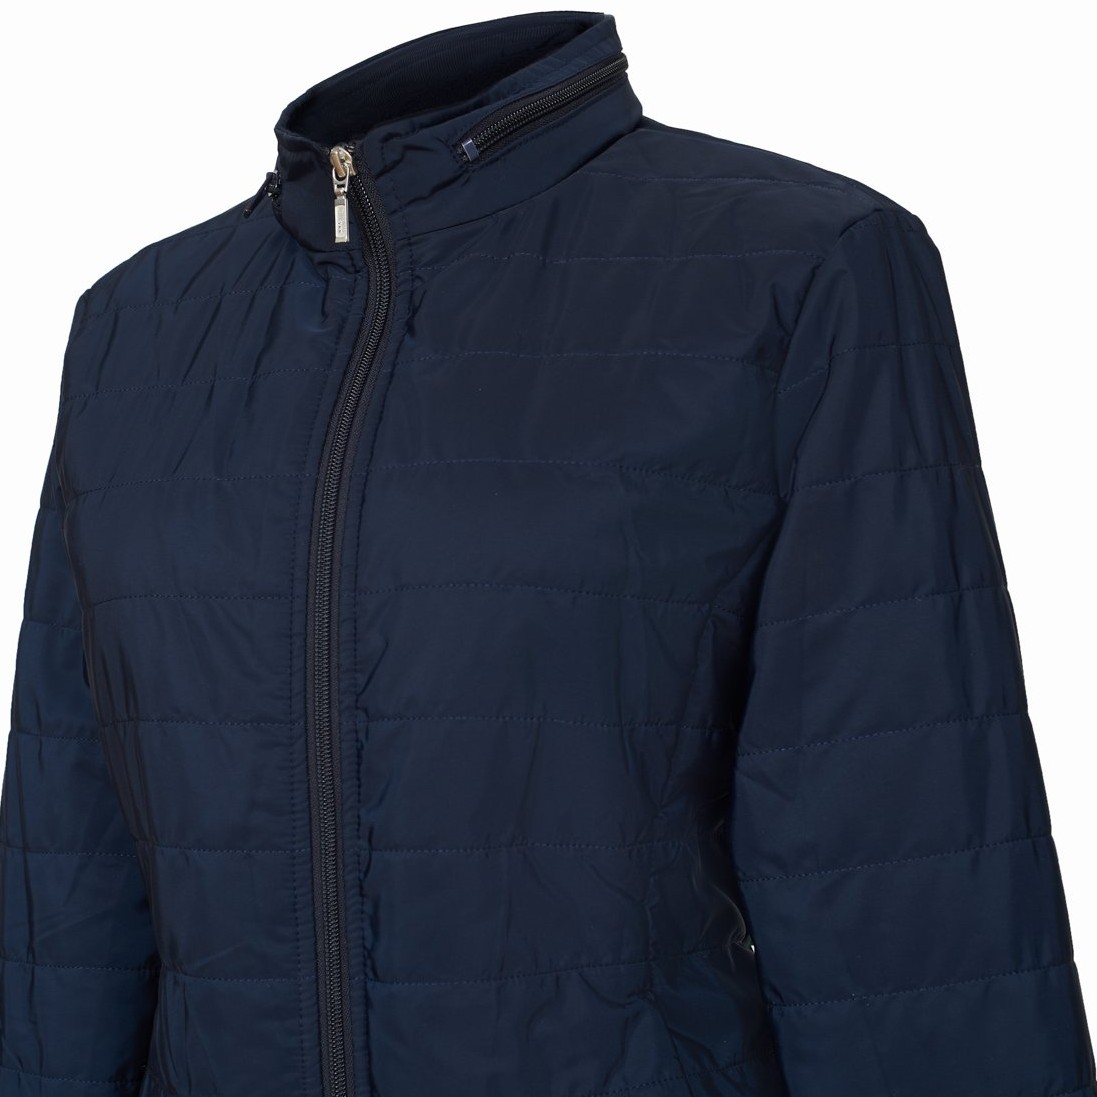 Fine Polyester Jacket- San Miguel Style- Navy Blue Color